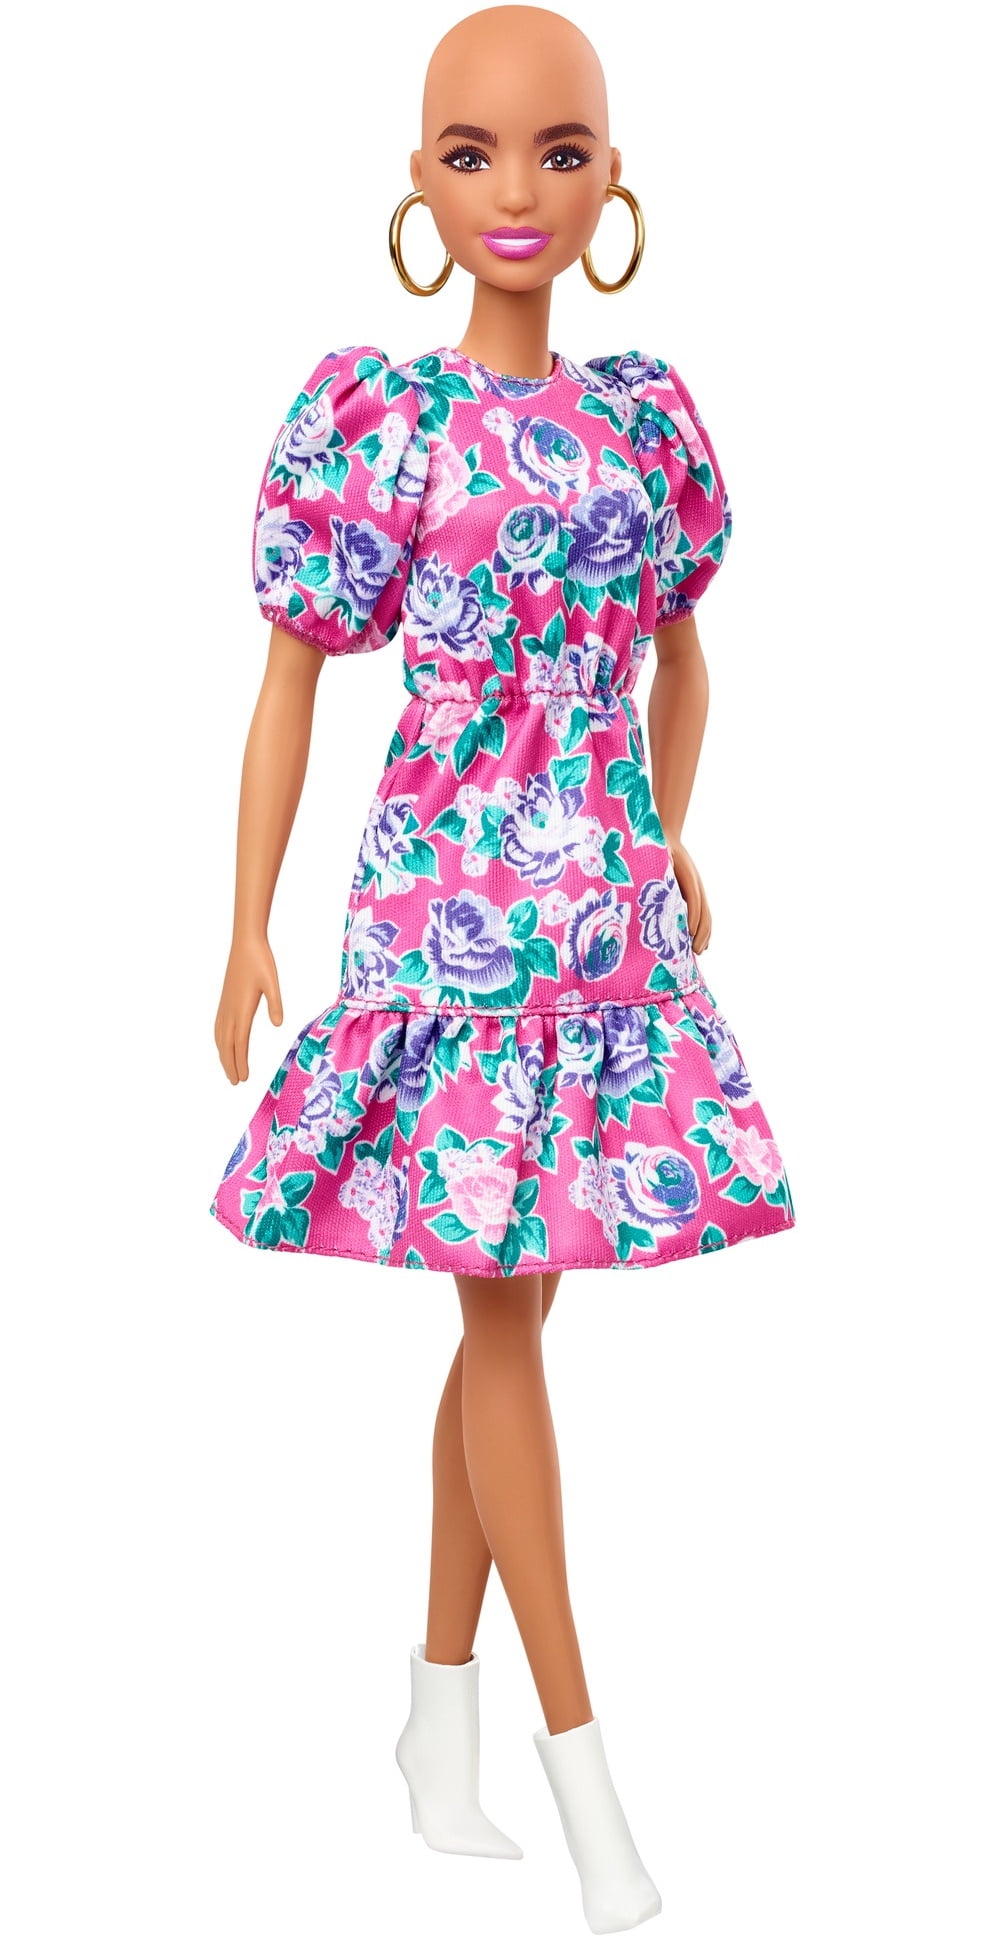 NEW WHITE & PINK  FLORAL dress  for Barbie doll 